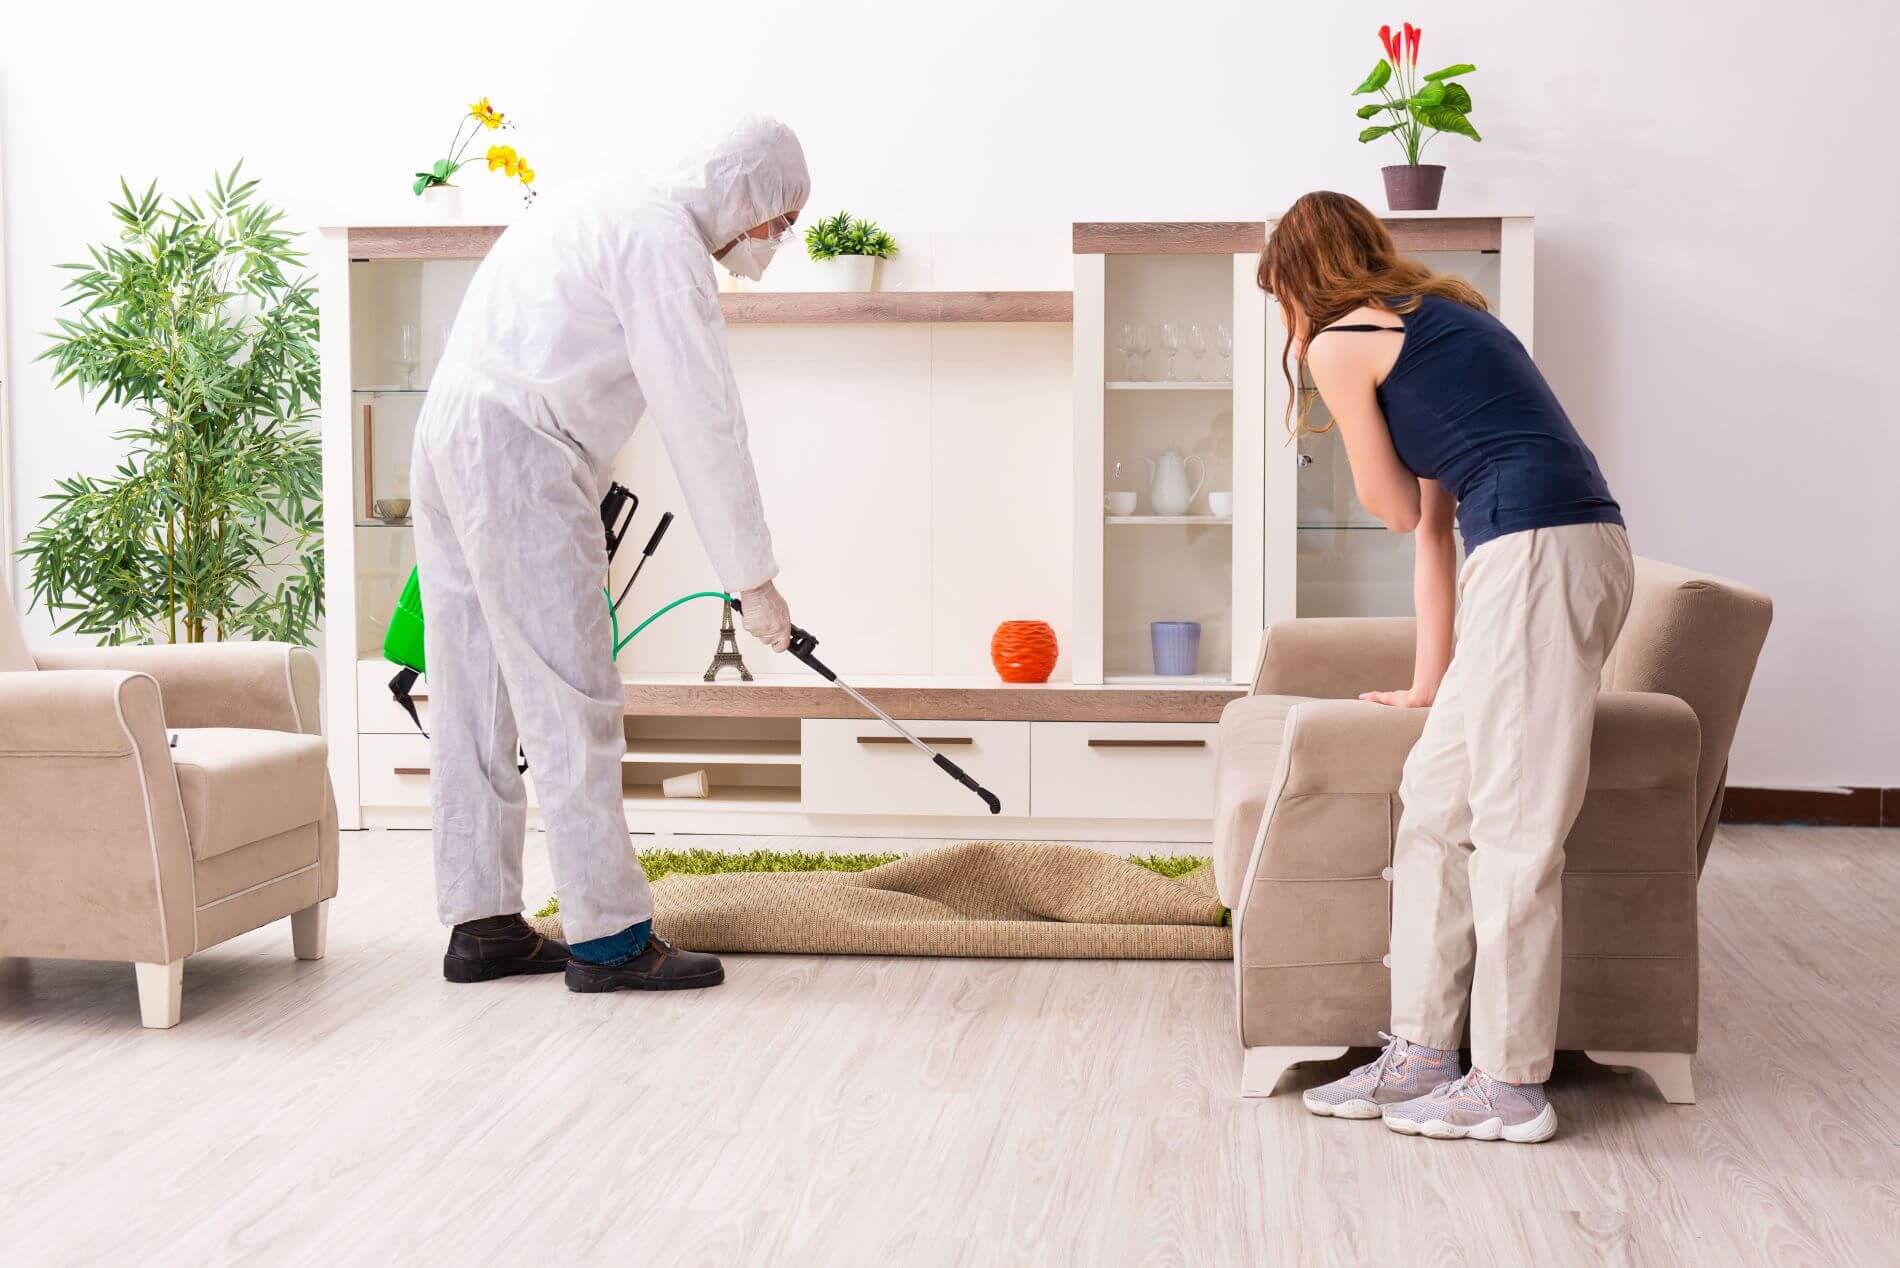 Cleaner and/or exterminator using chemicals in a living room.